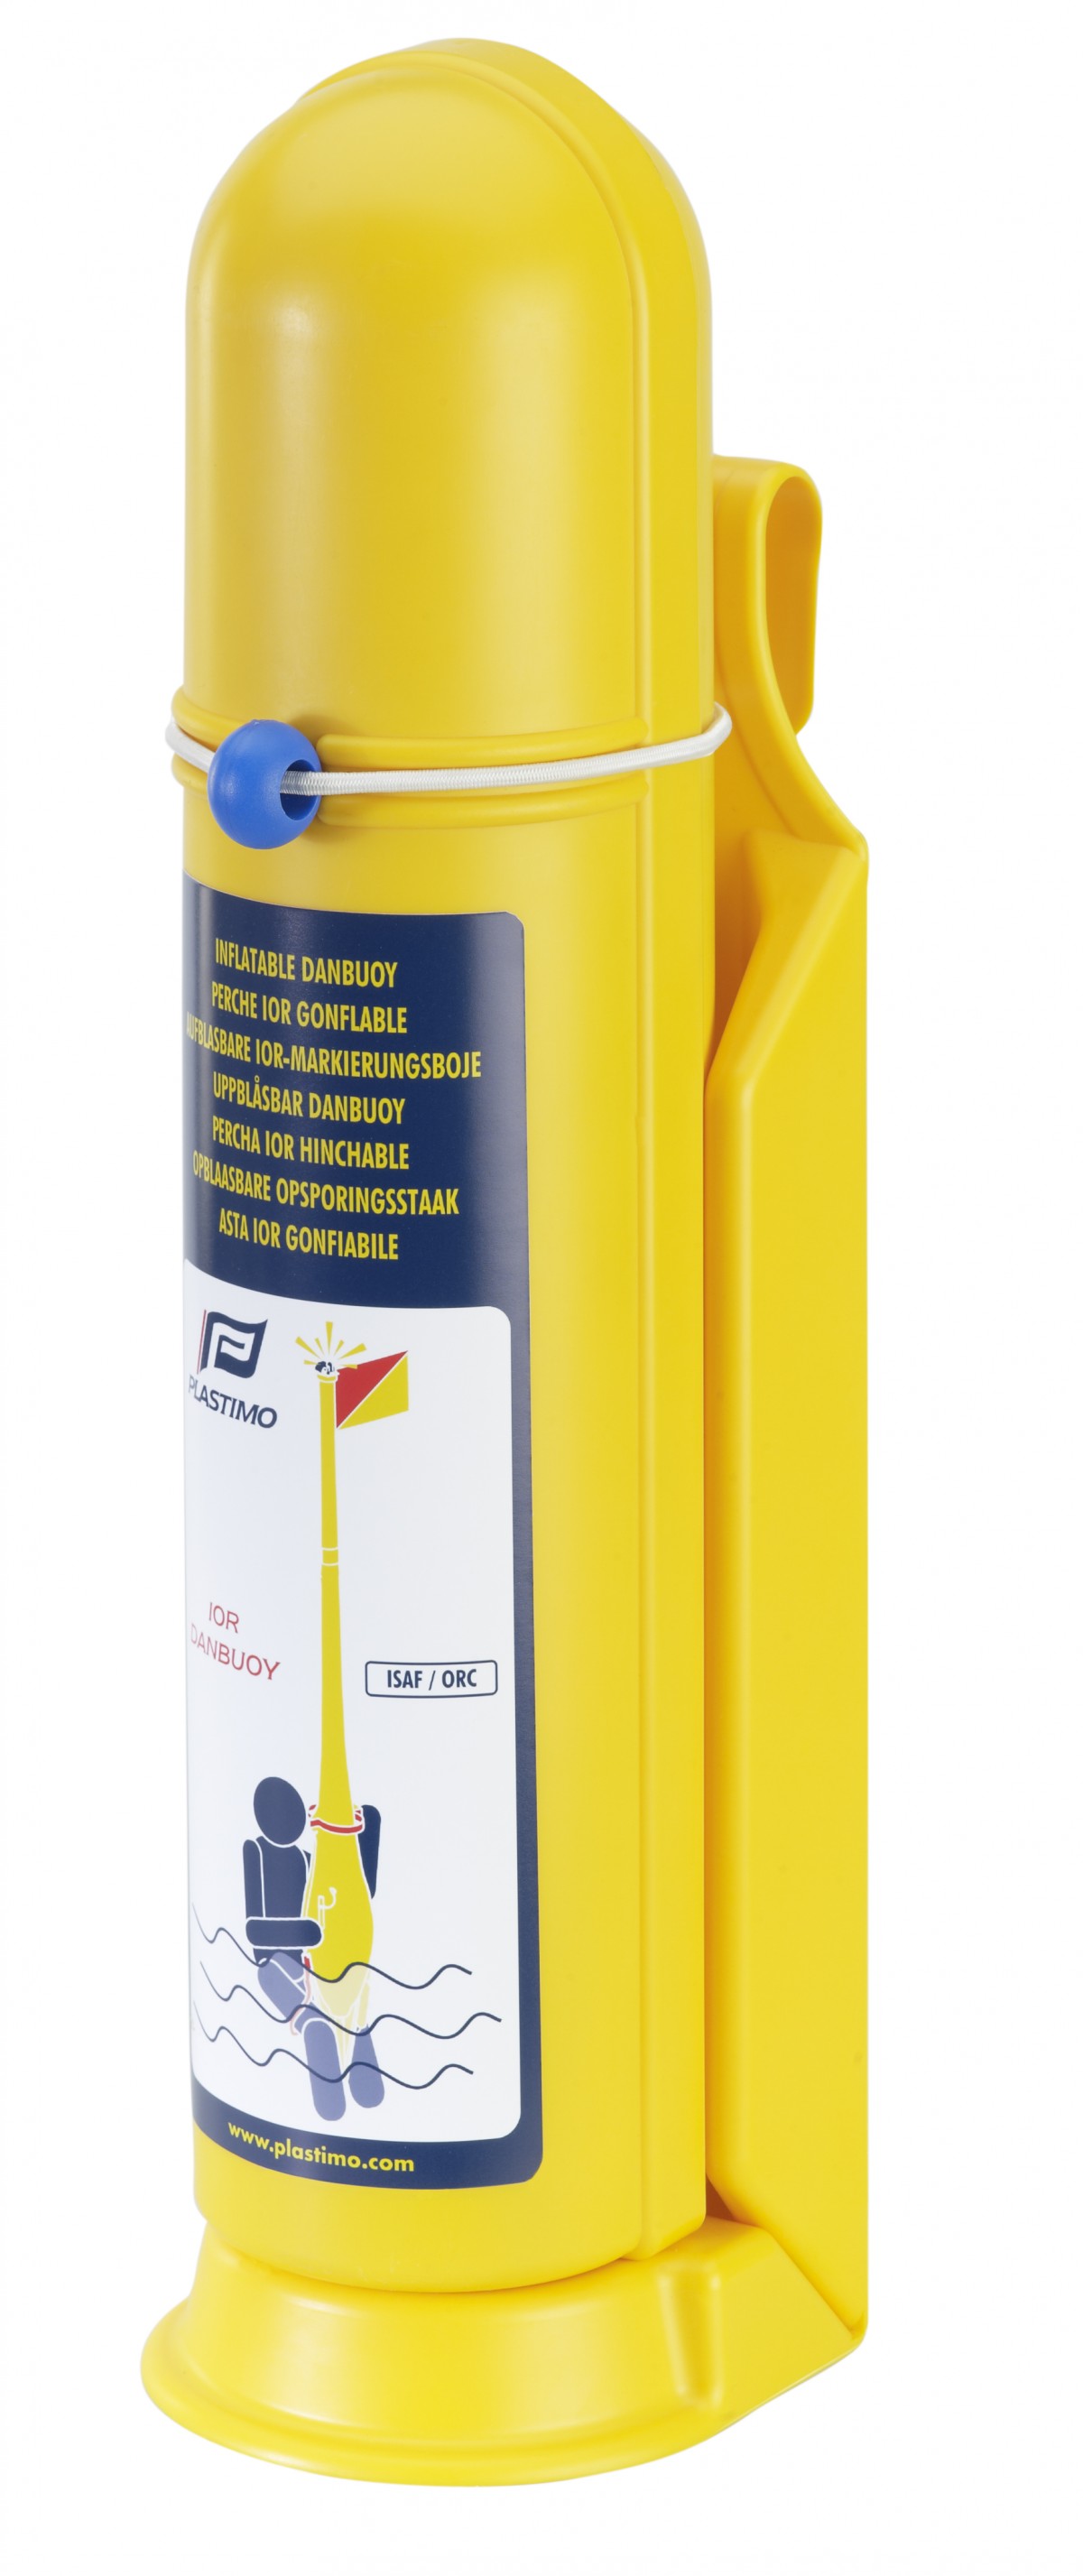 Plastimo IOR Dan Buoy Replacement Canister & Holder, Yellow